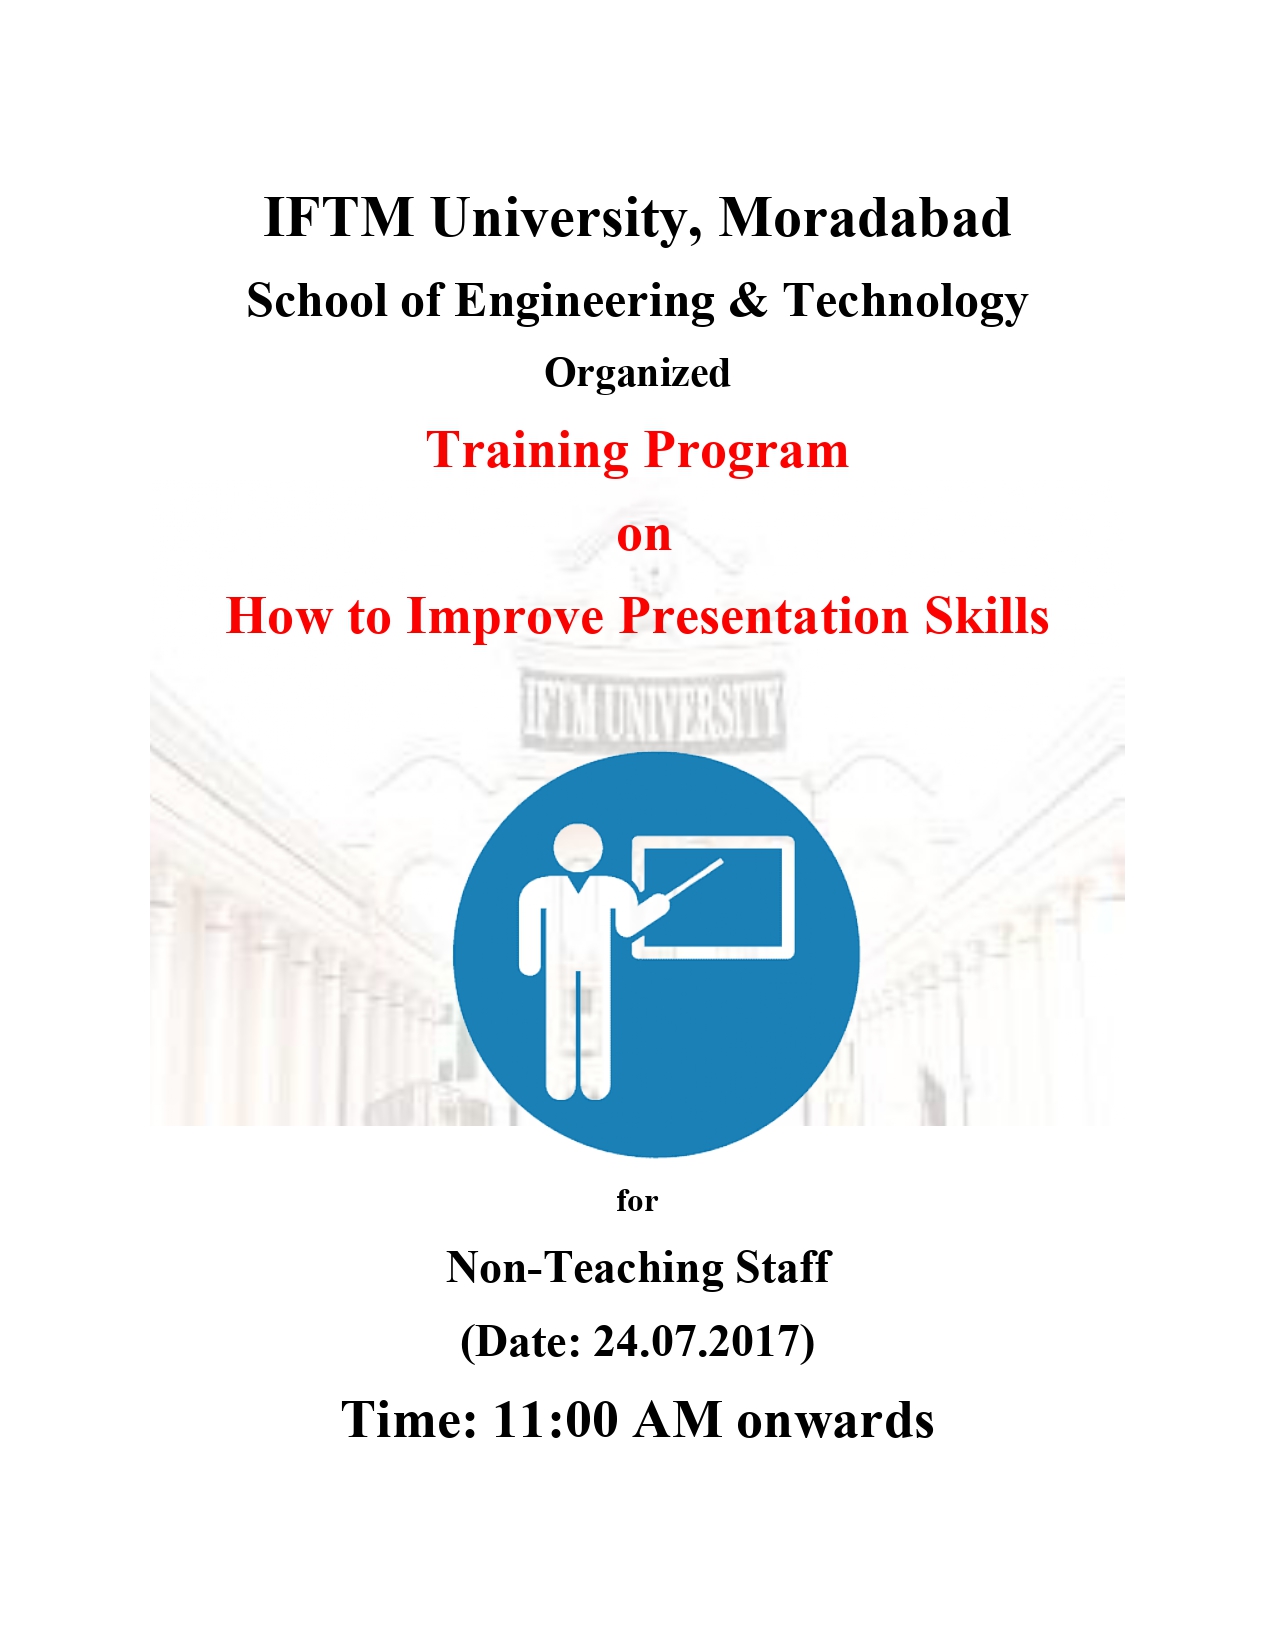 Training course on How to Improve presentation skills for non-teaching staff